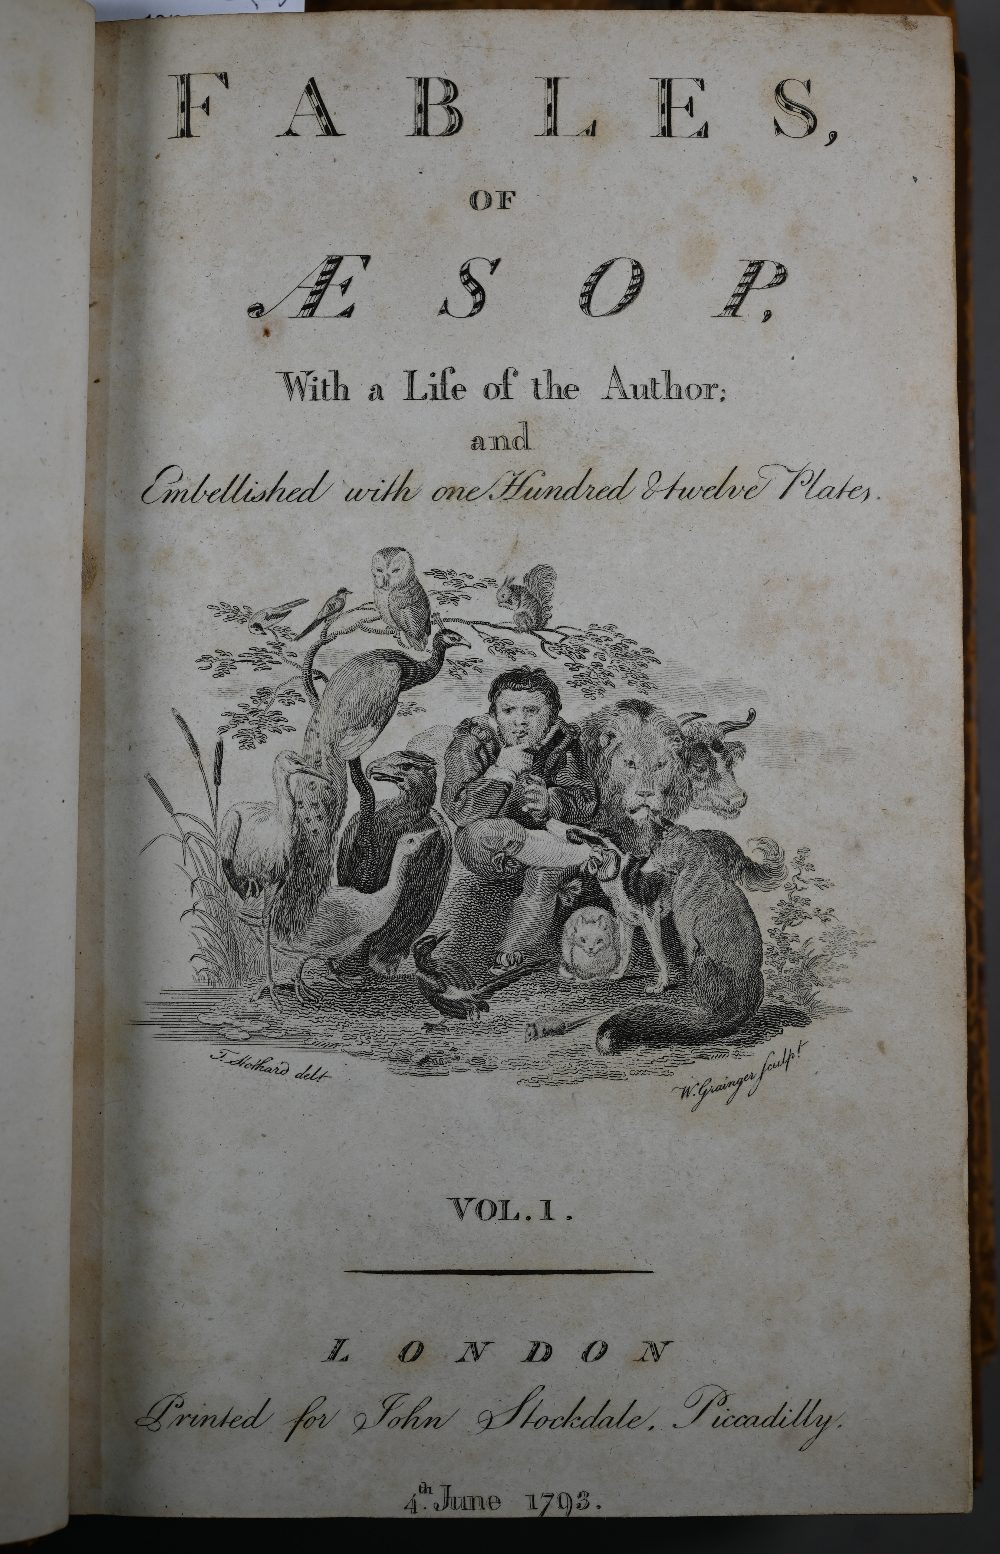 Aesop's Fables with engraved illustrations, two volumes, London: John Stockdale 1793, full dec - Image 4 of 4